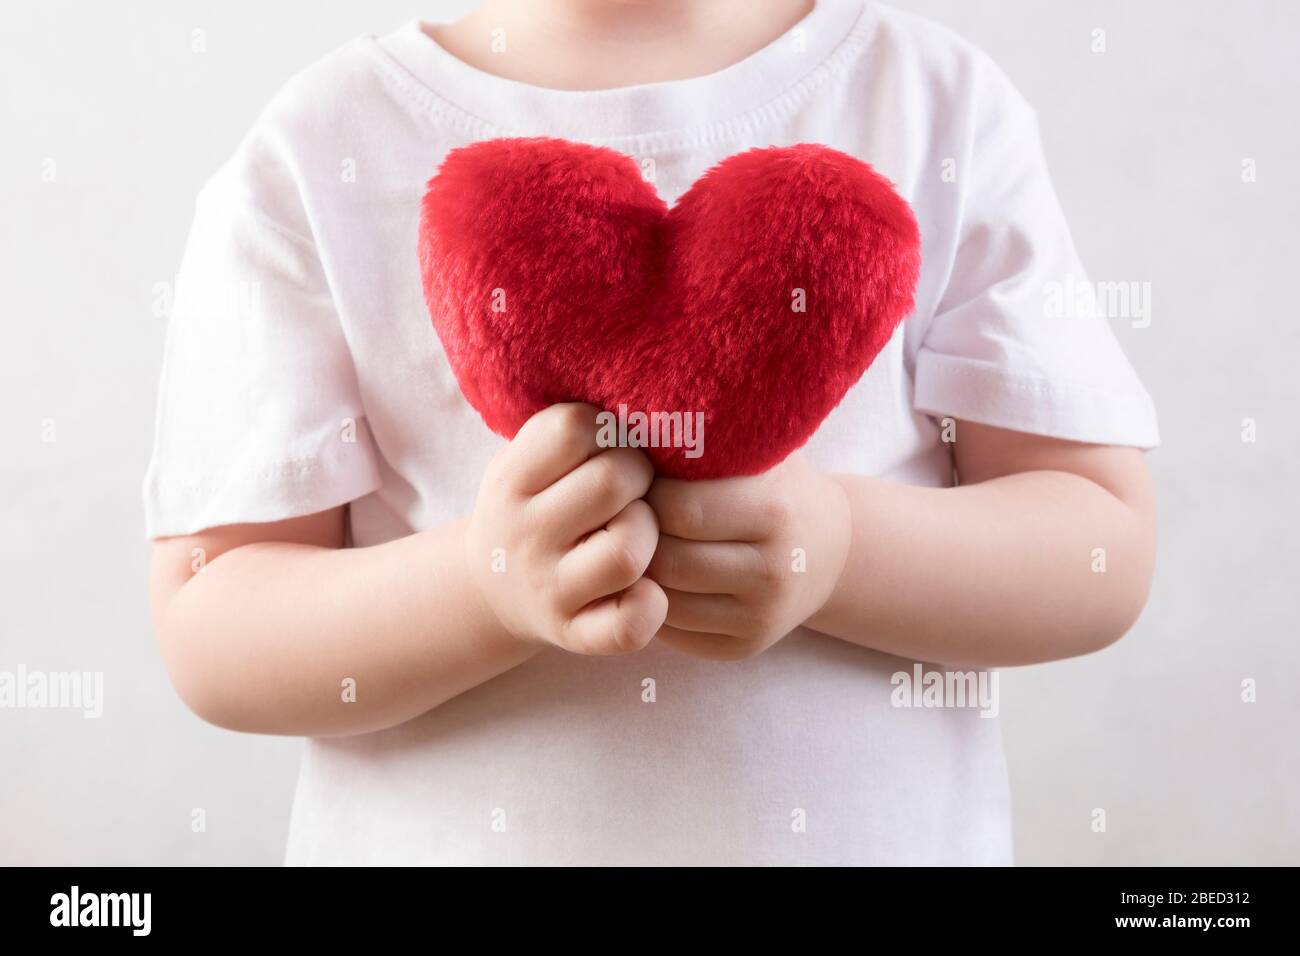 Three year old child holding a fluffy red heart Stock Photo